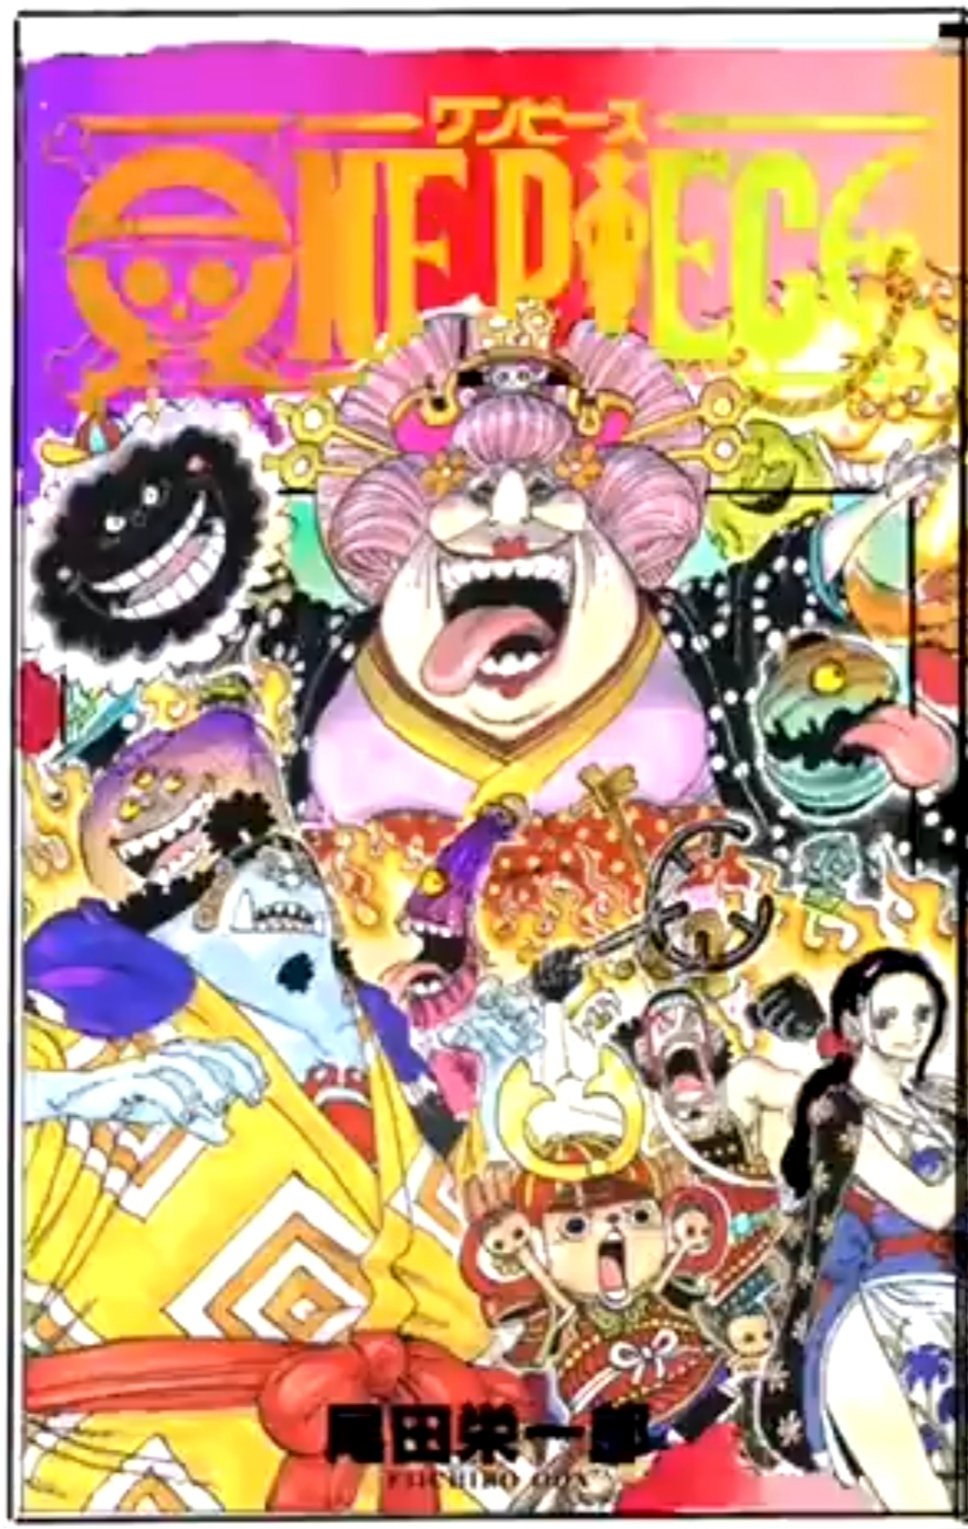 Artur Library Of Ohara One Piece Volume 99 Cover Unfinished Version The Covers Of Vols 99 101 Will All Form A Triple Mega Cover Much Like The Covers For Vols